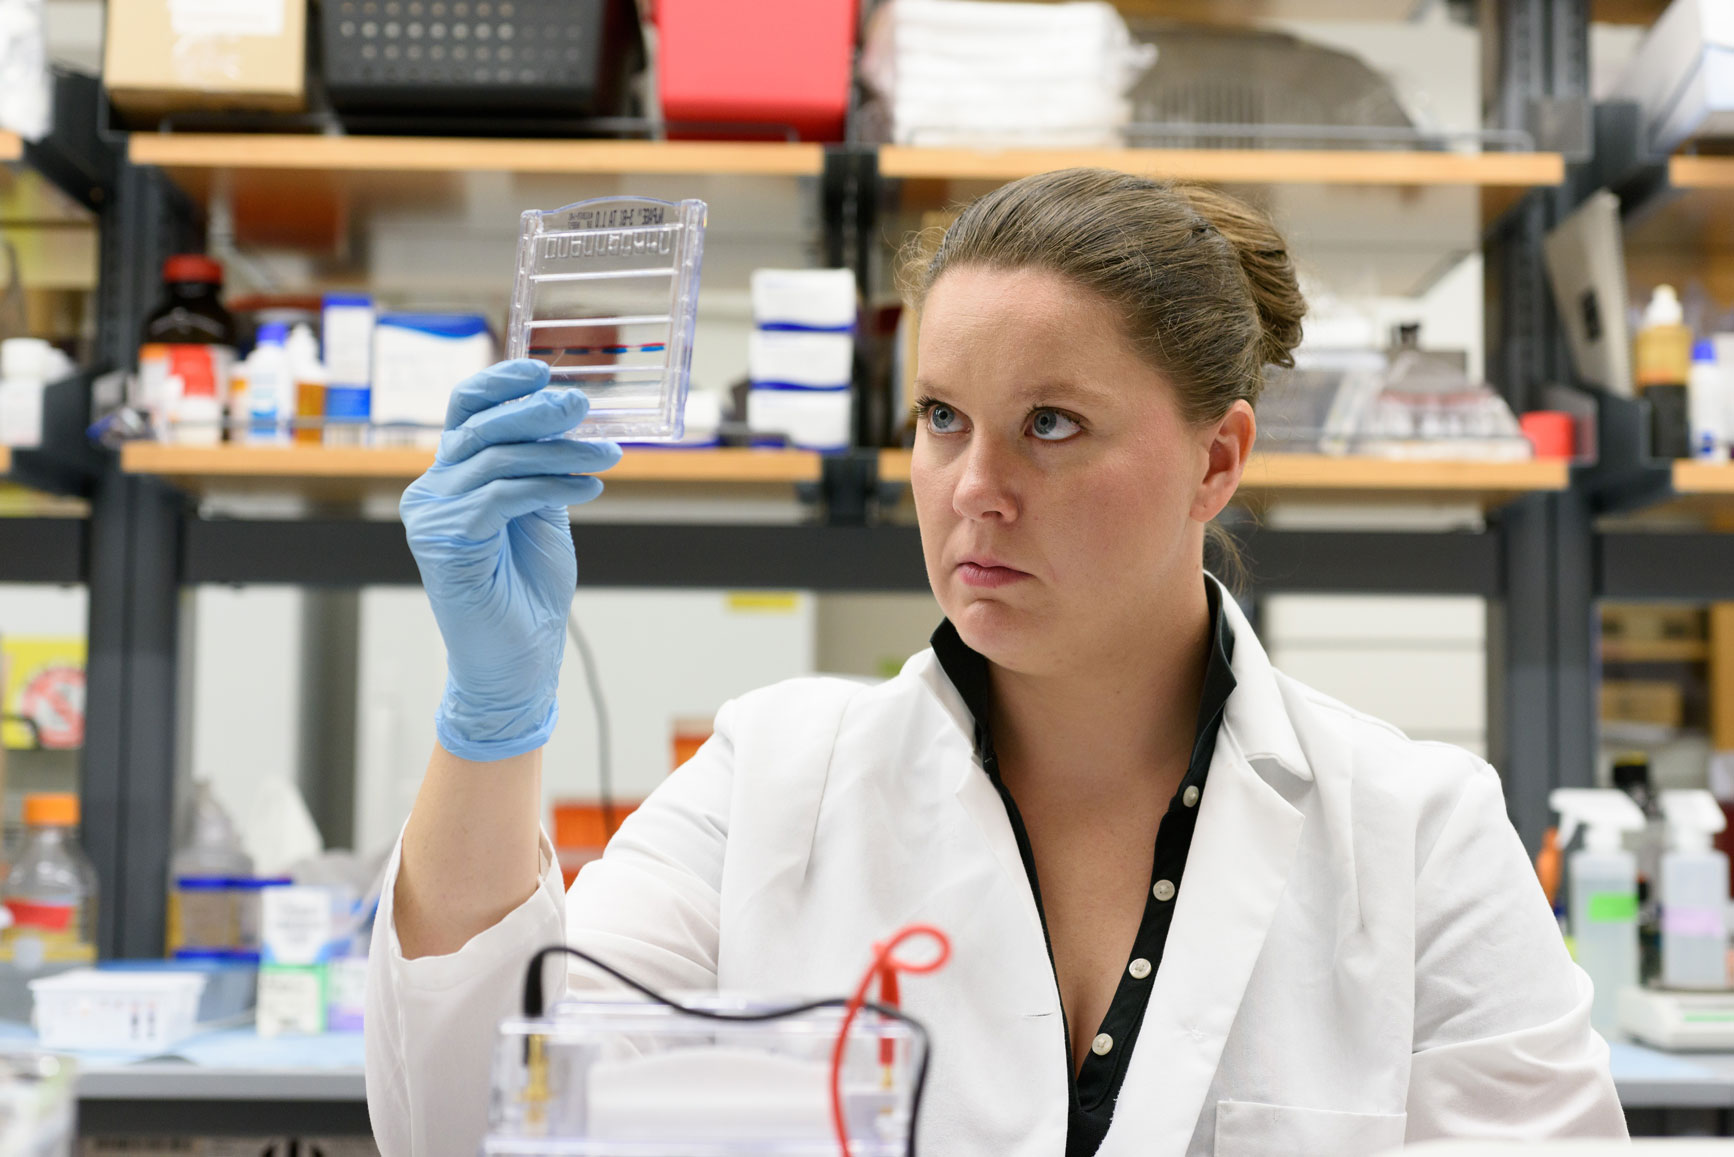 researcher examines sample